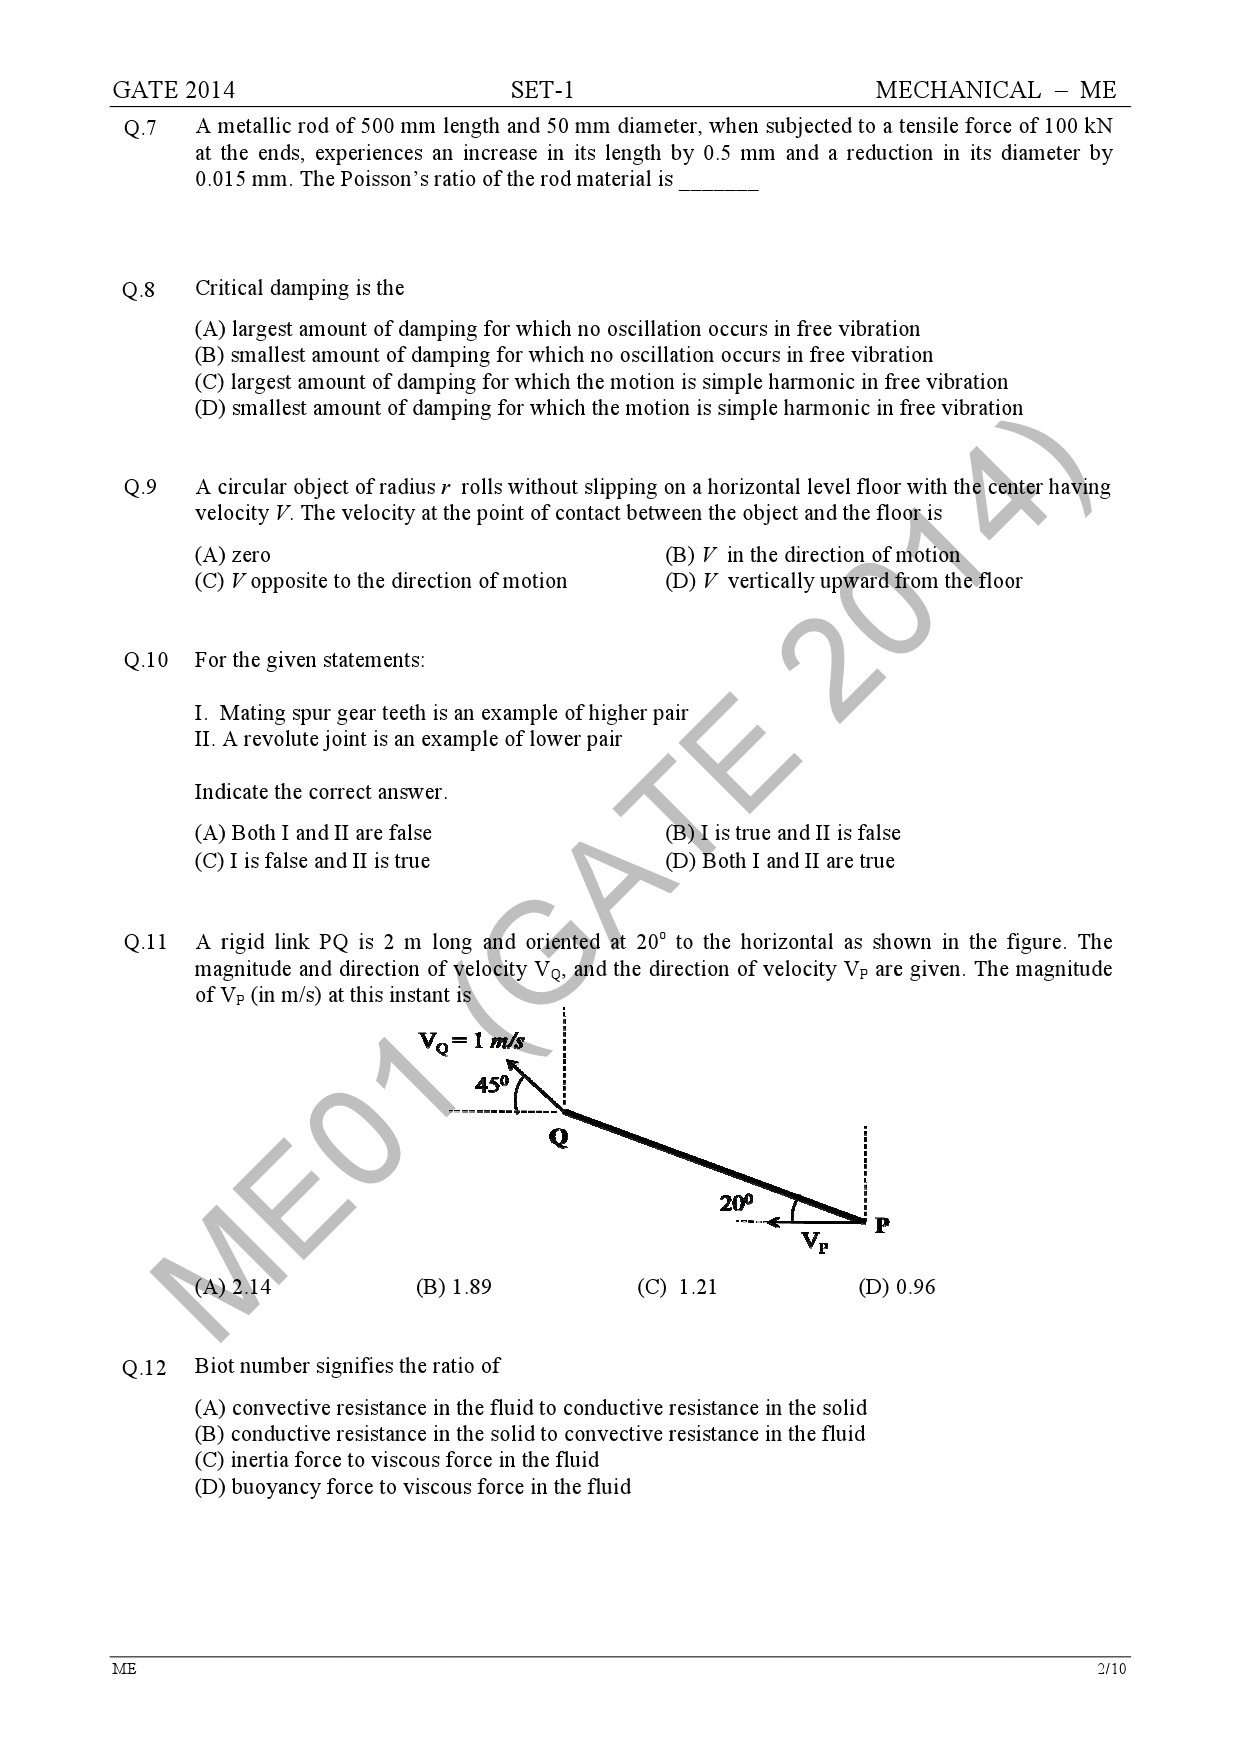 GATE Exam Question Paper 2014 Mechanical Engineering Set 1 8